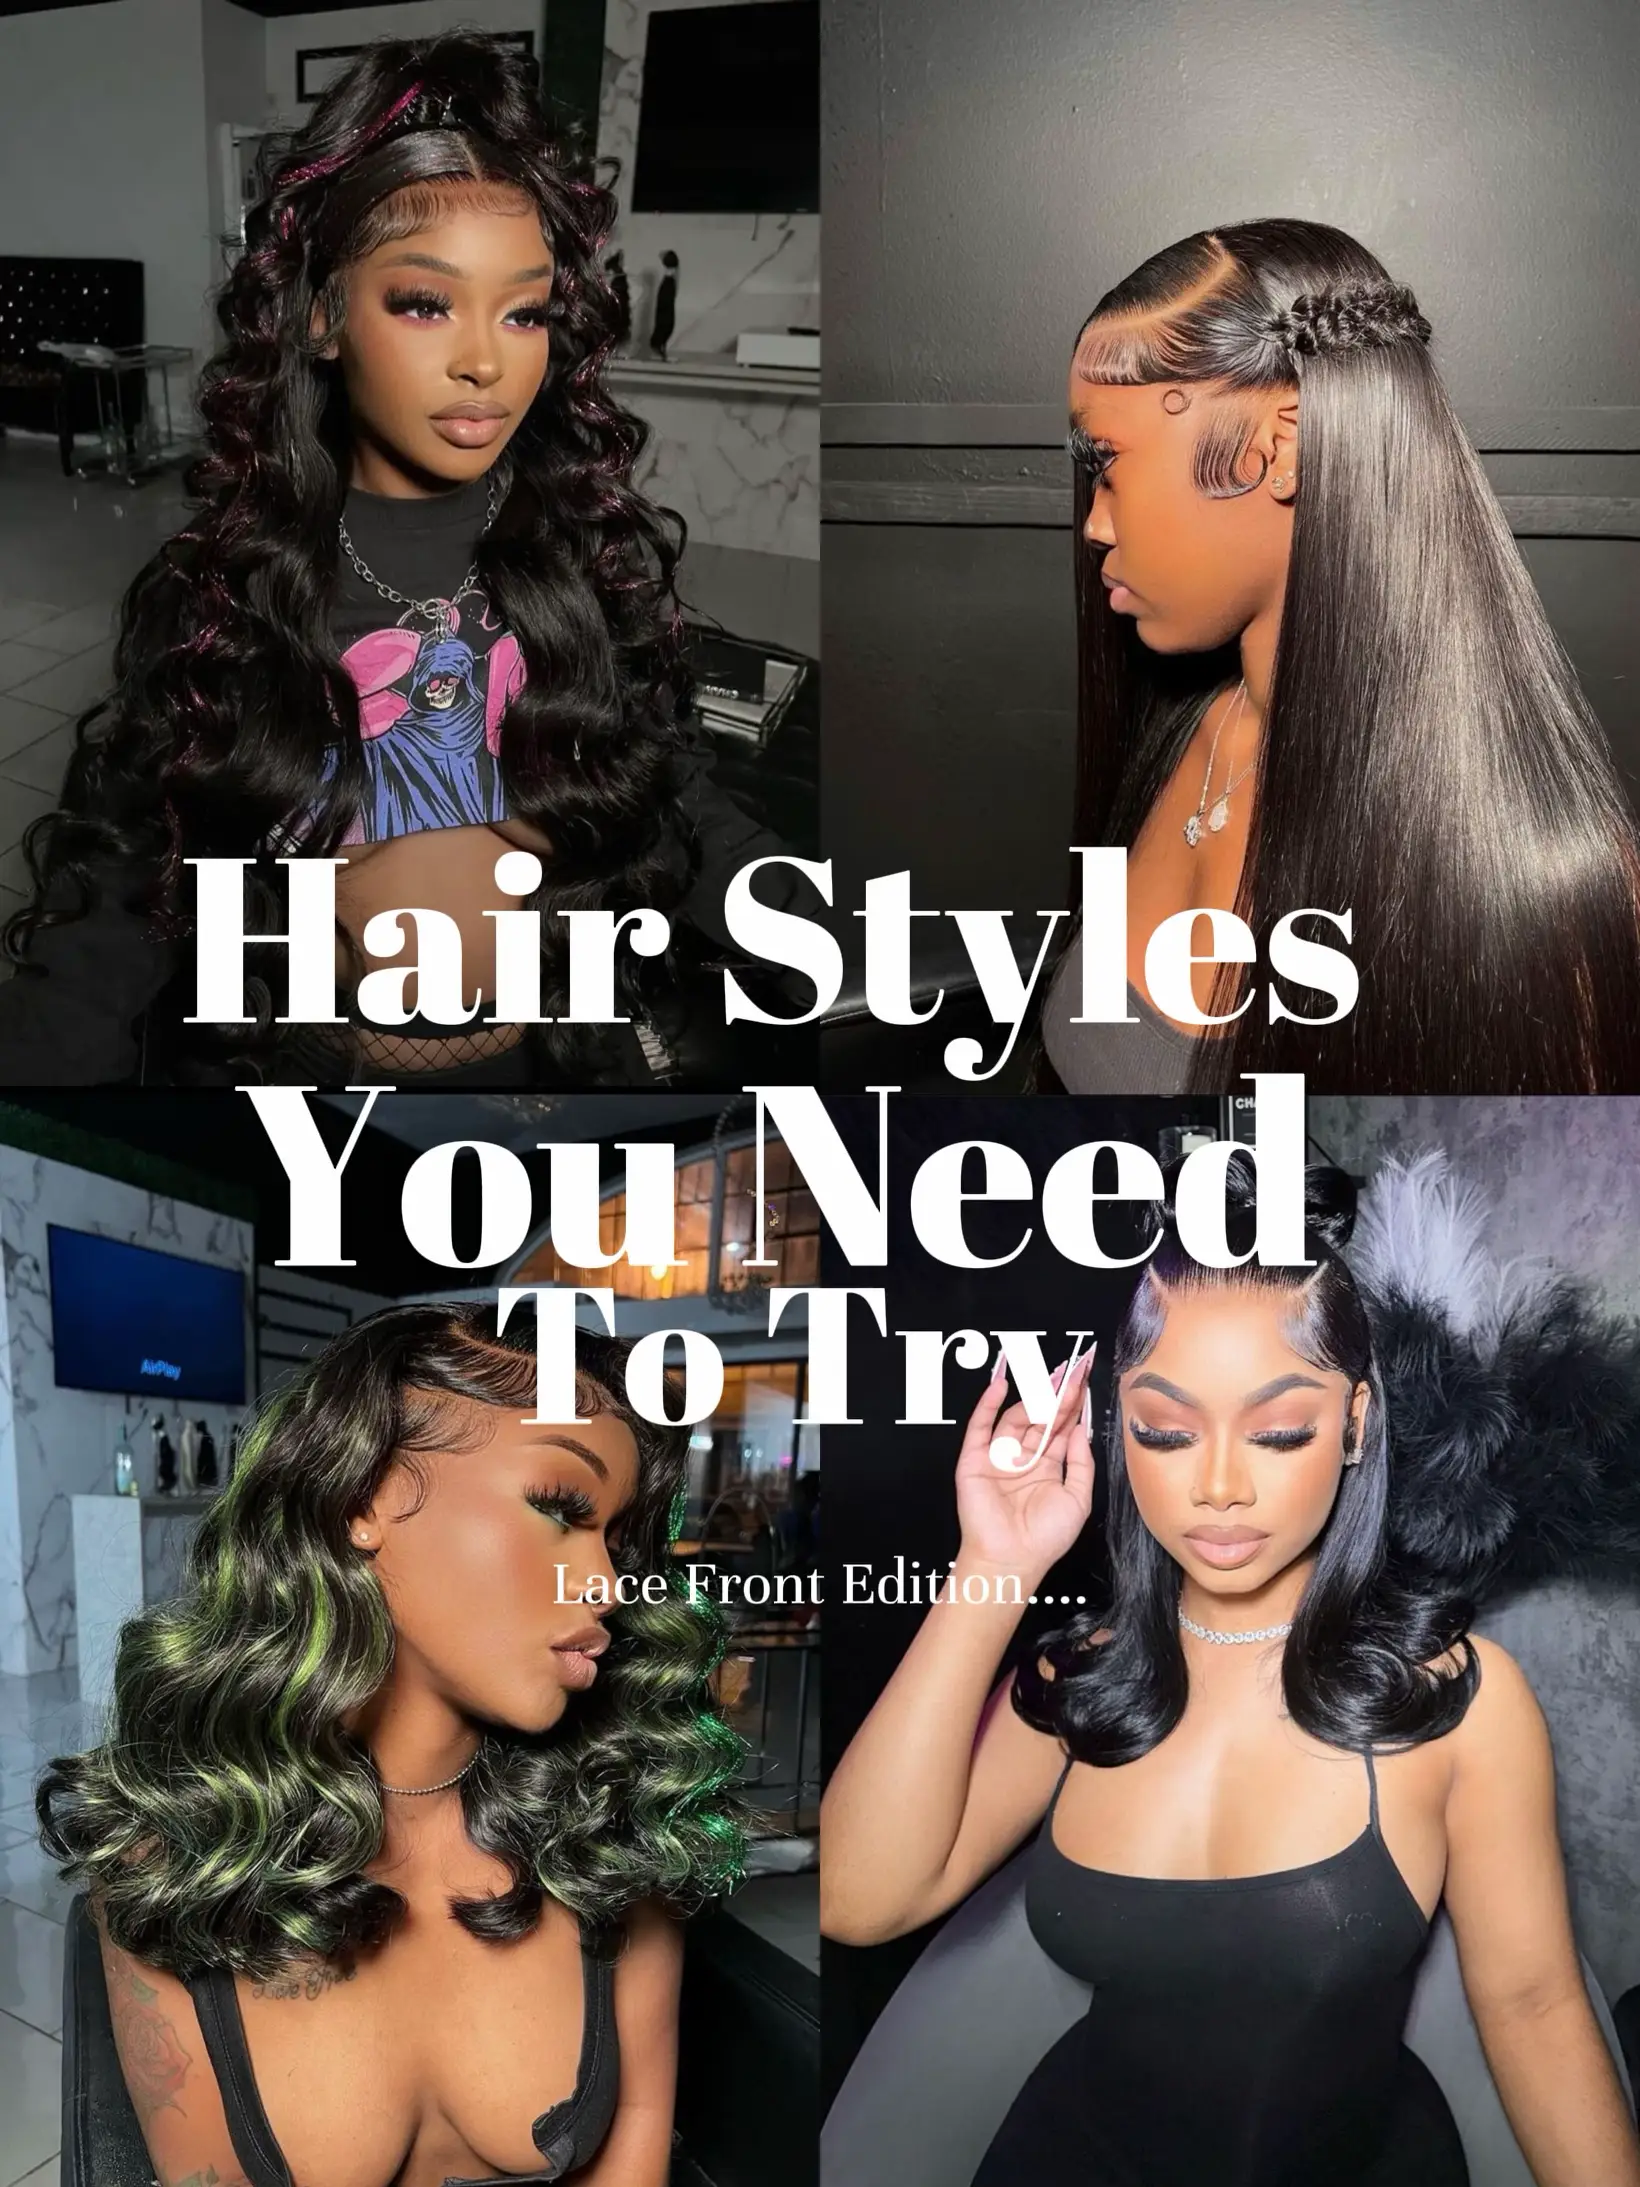 How To Sew In with A Lace Frontal Closure (2024 Update)